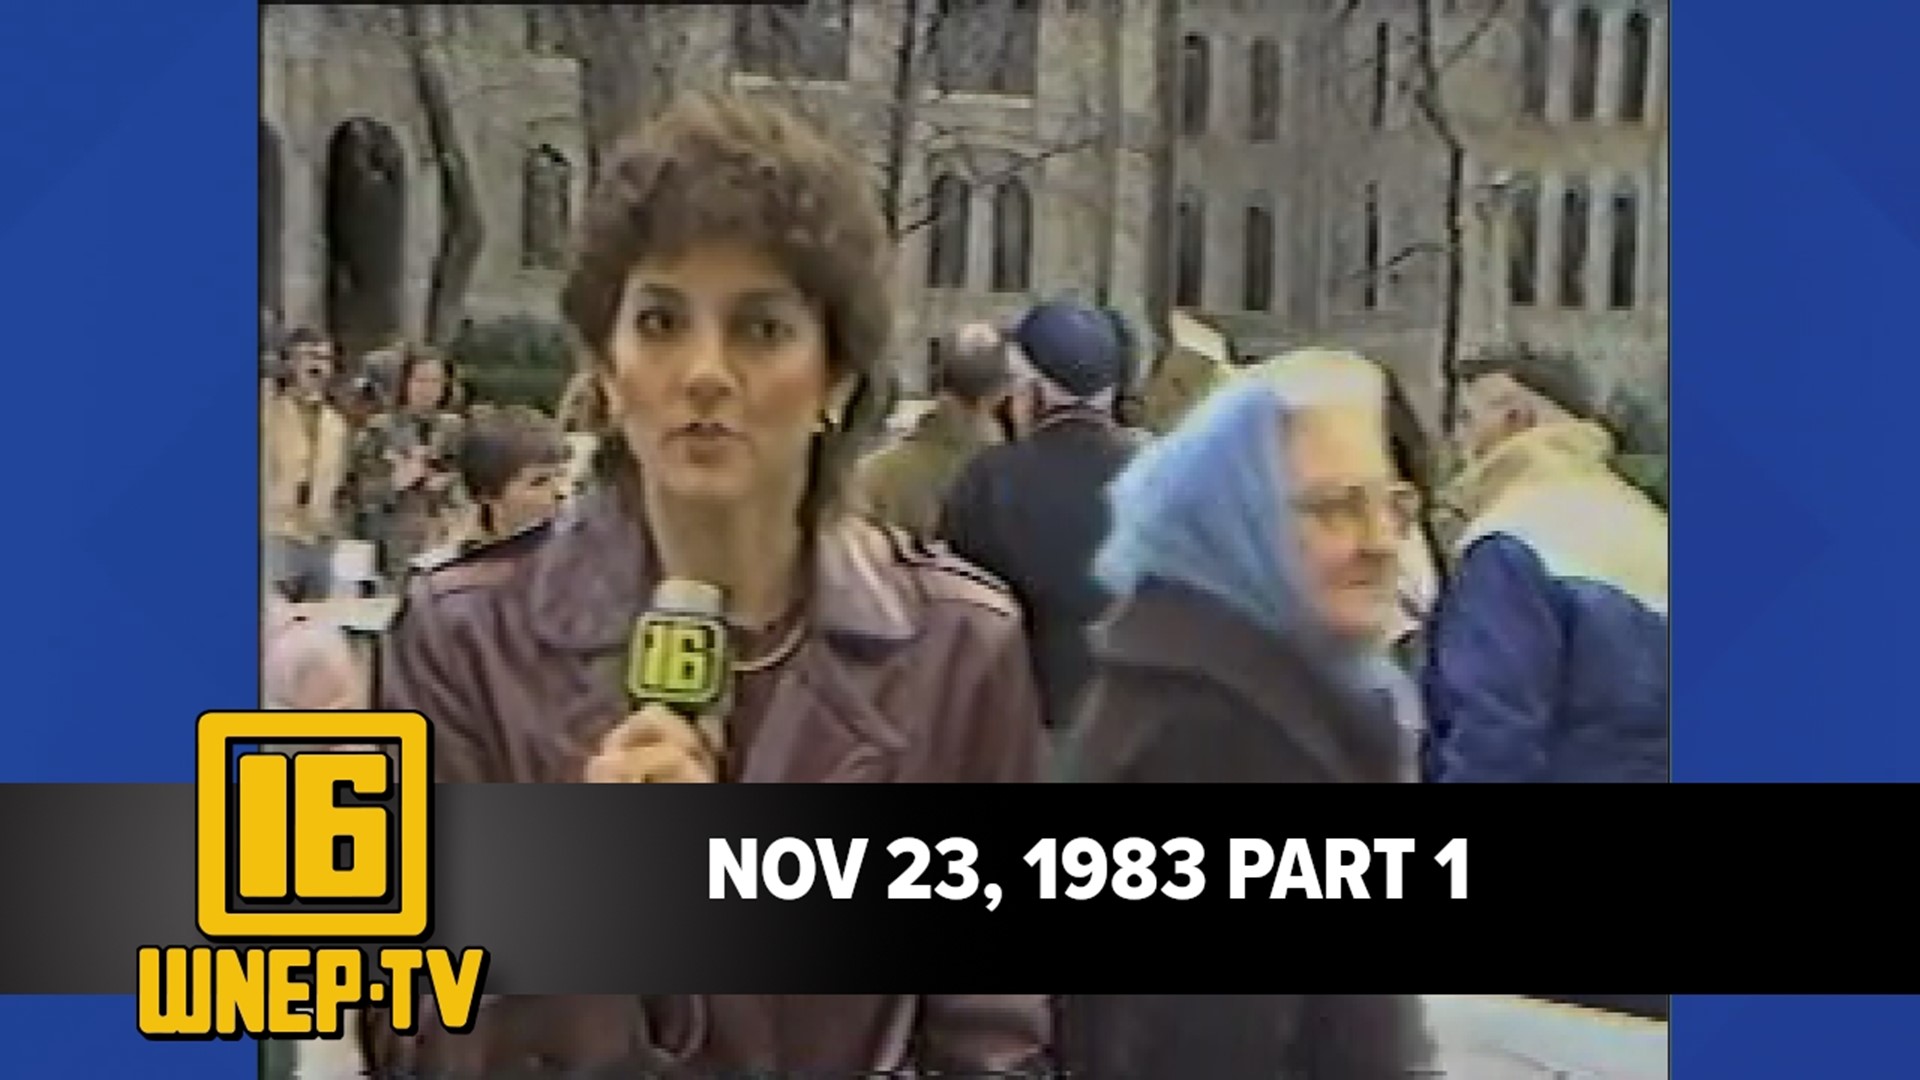 Join Karen Harch and Nolan Johannes for curated stories from November 23, 1983.